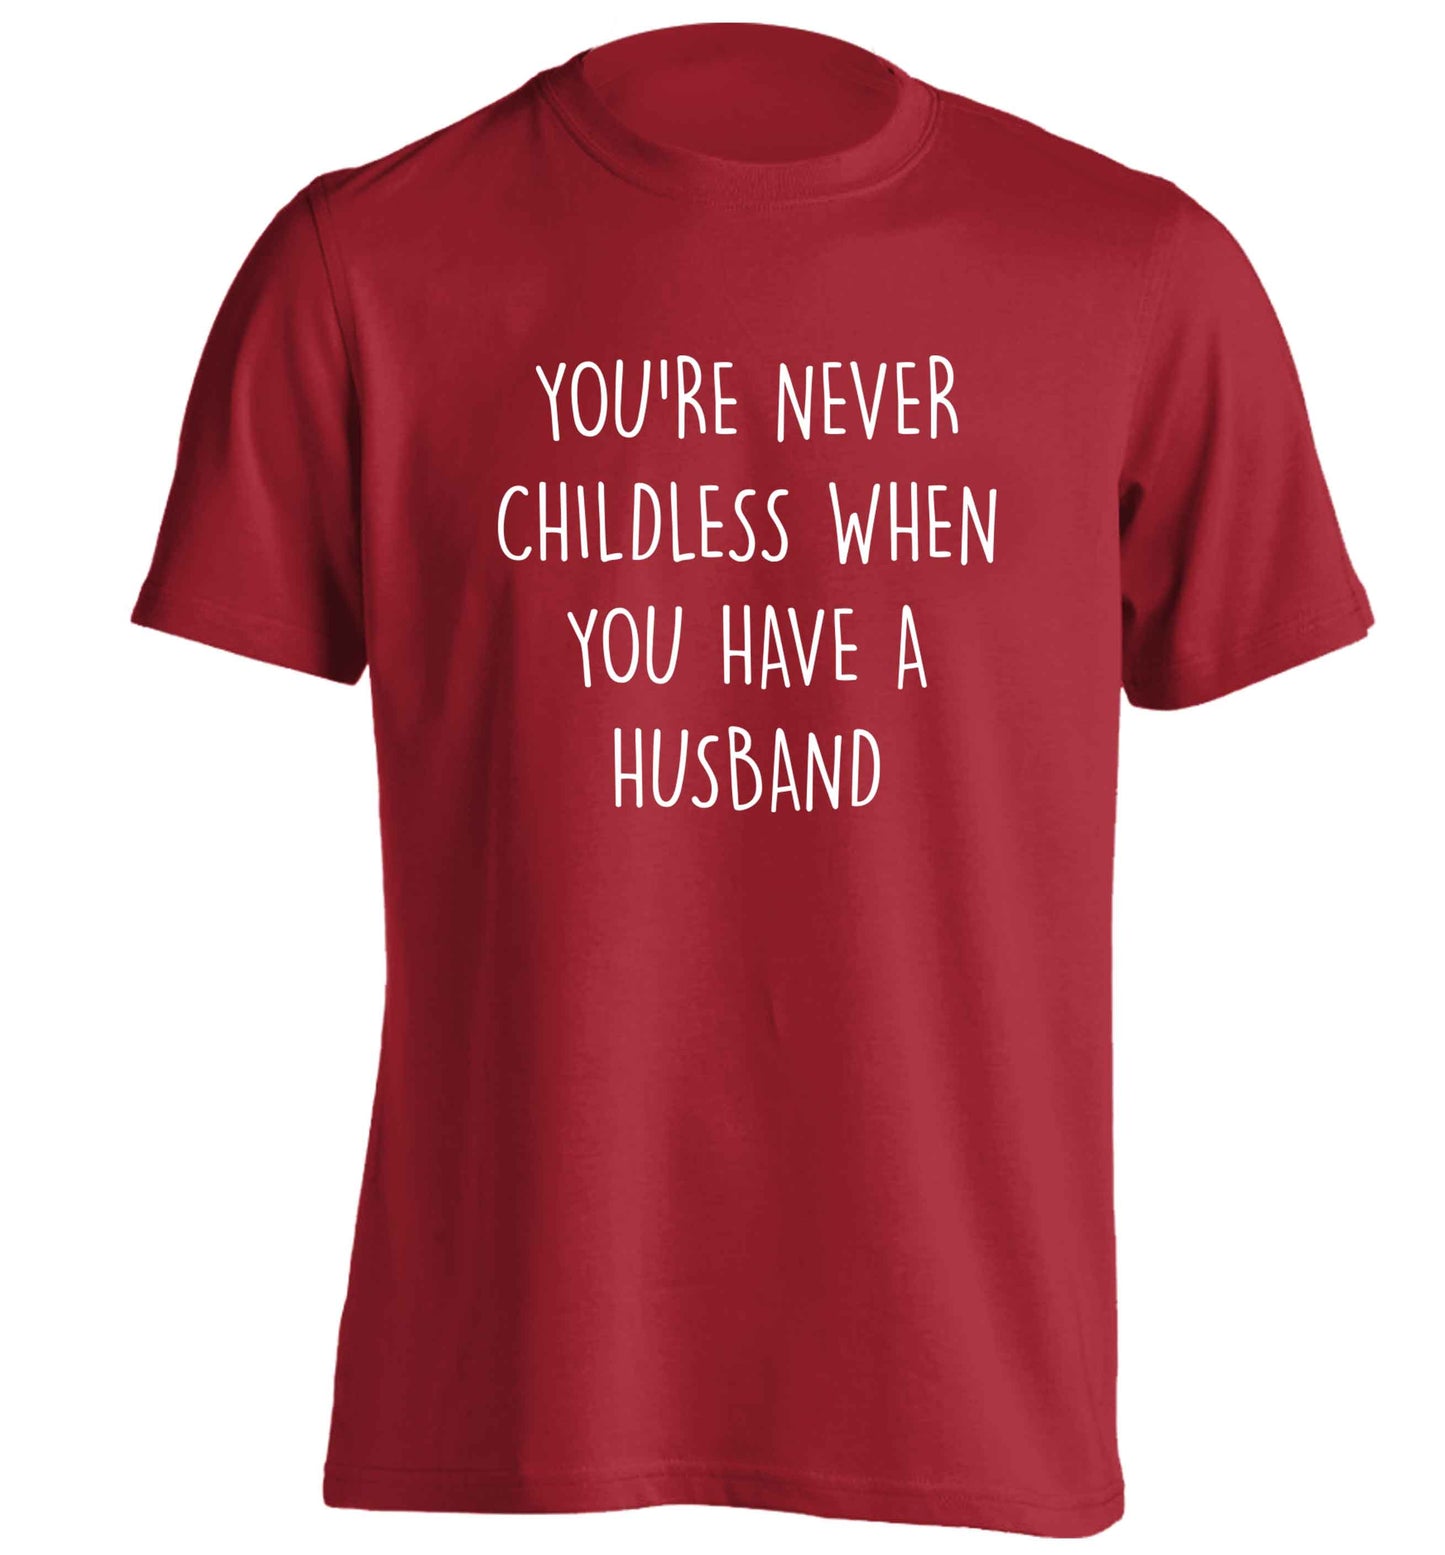 You're never childess when you have a husband adults unisex red Tshirt 2XL